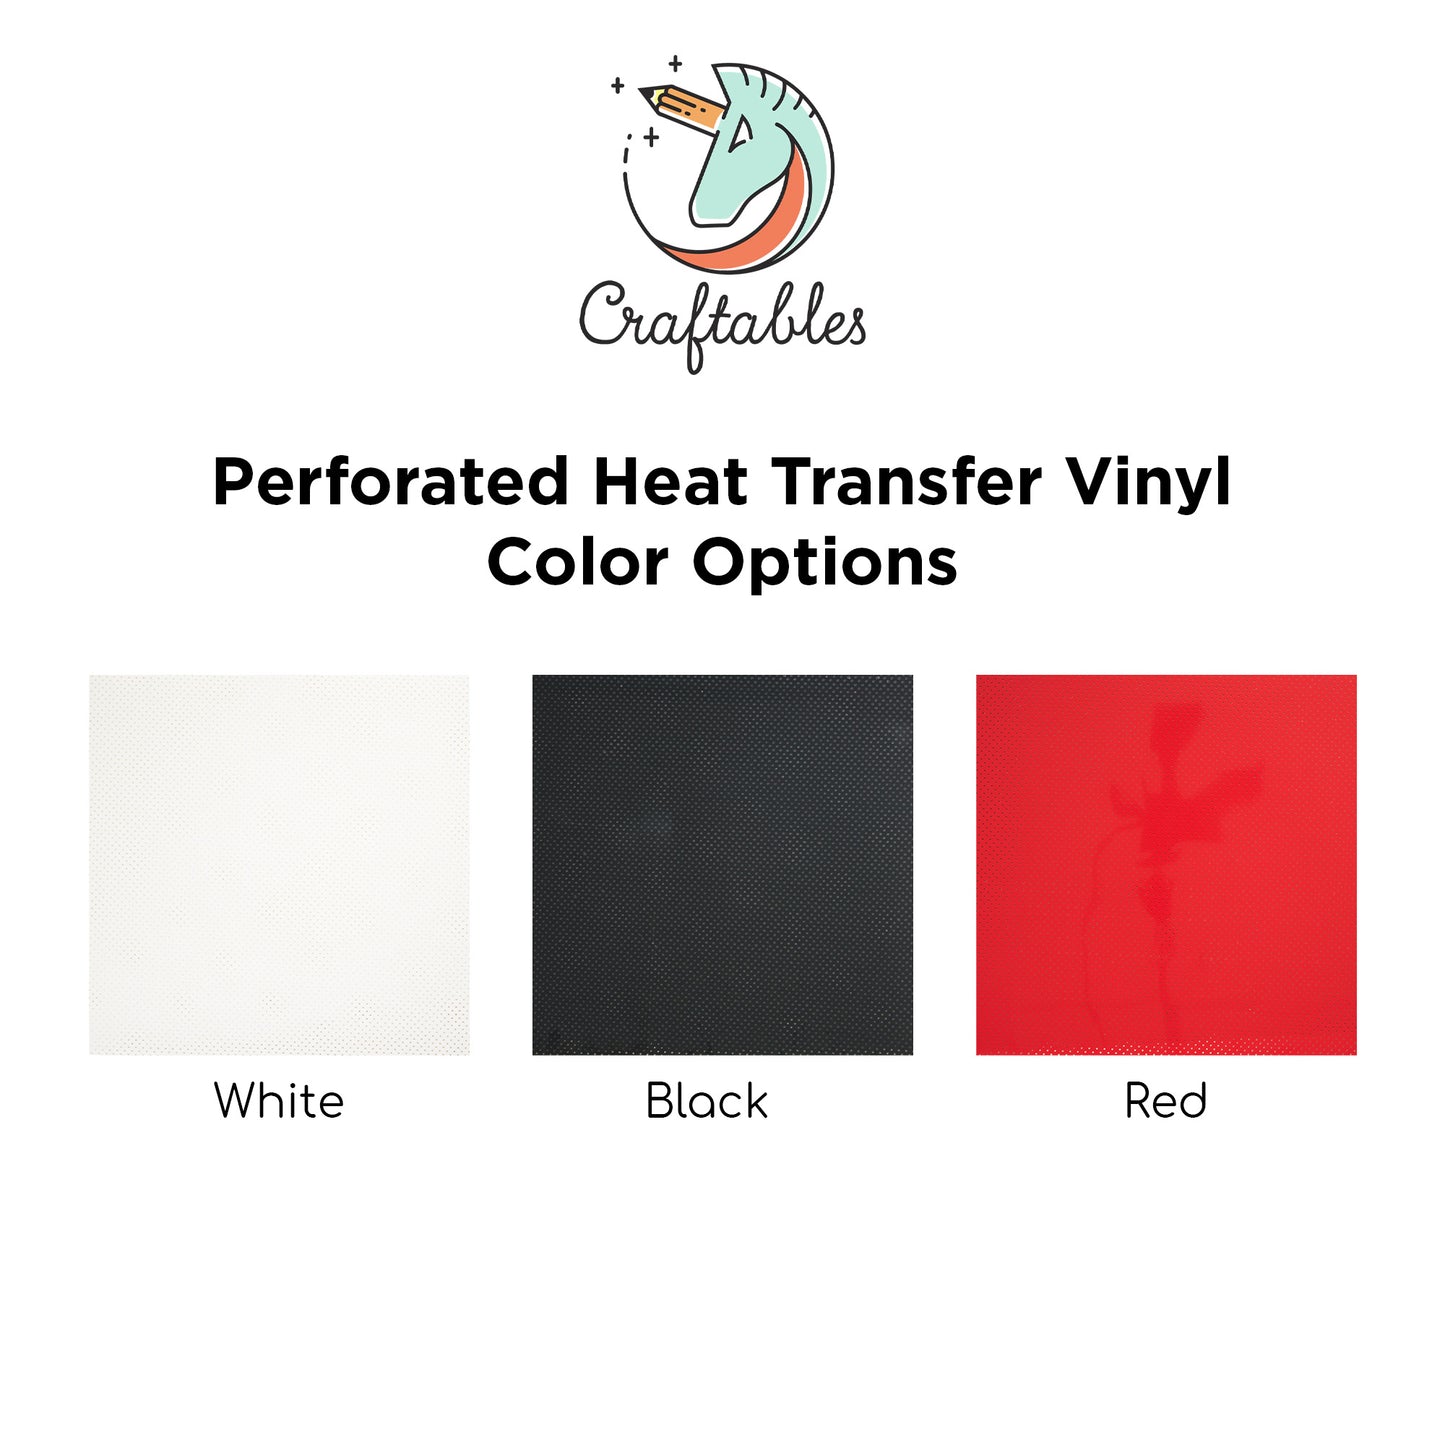 White Perforated Heat Transfer Vinyl Sheets By Craftables